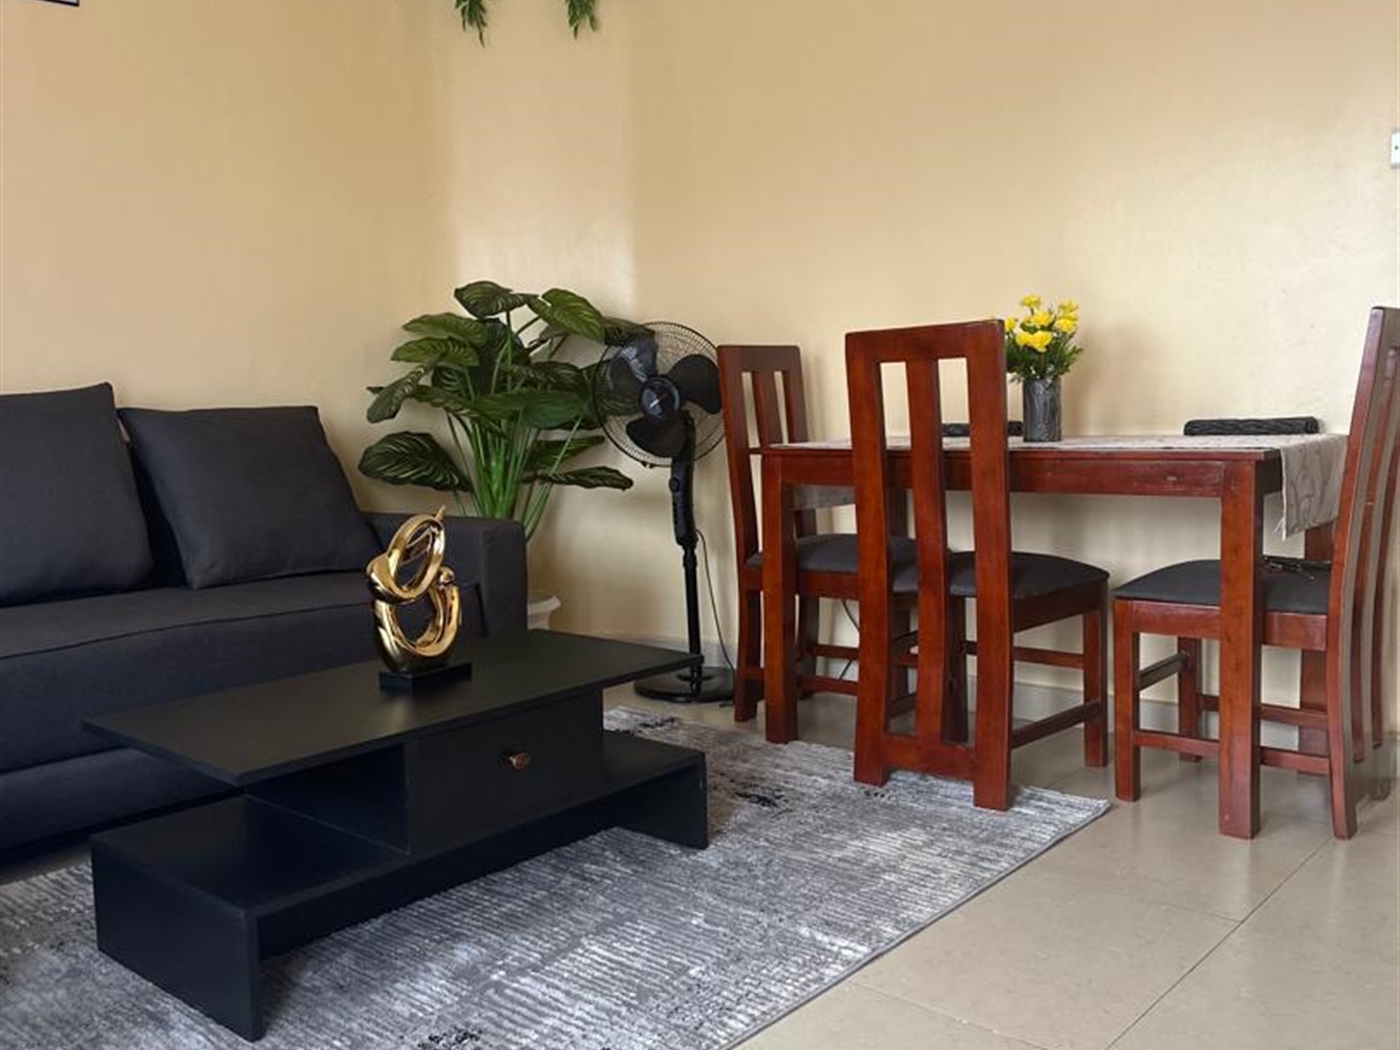 Apartment for rent in Makerere Kampala